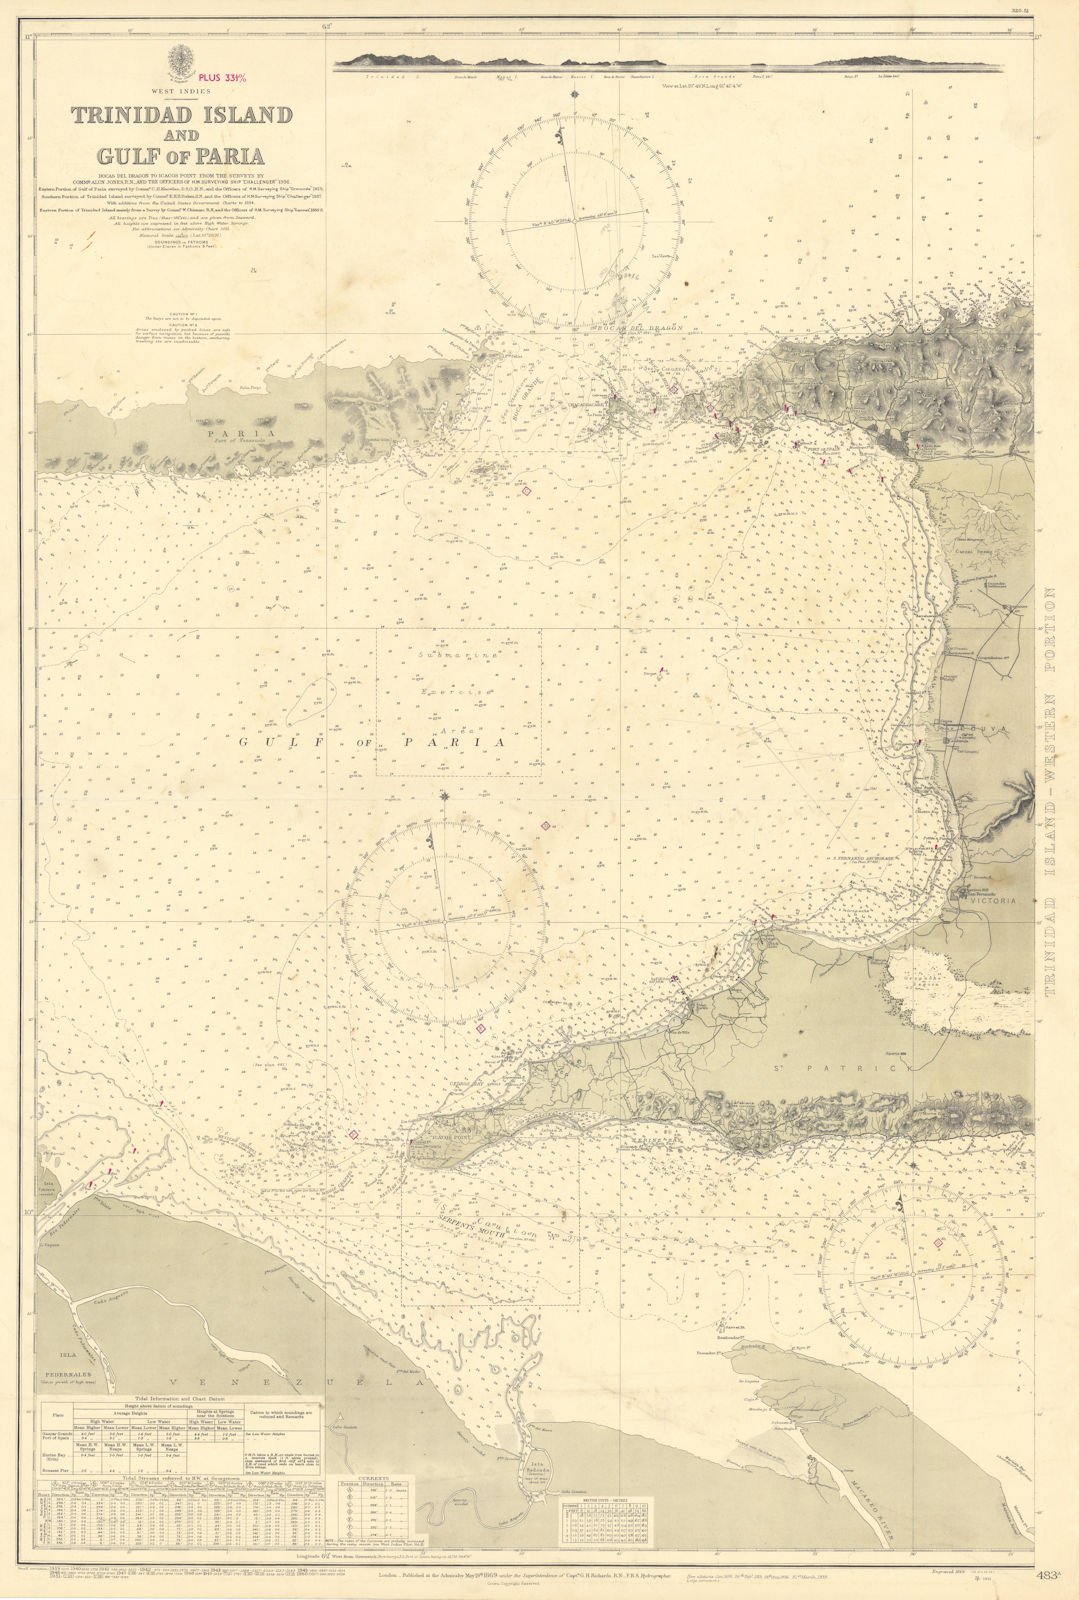 Trinidad west part Gulf of Paria West Indies ADMIRALTY sea chart 1869 (1951) map